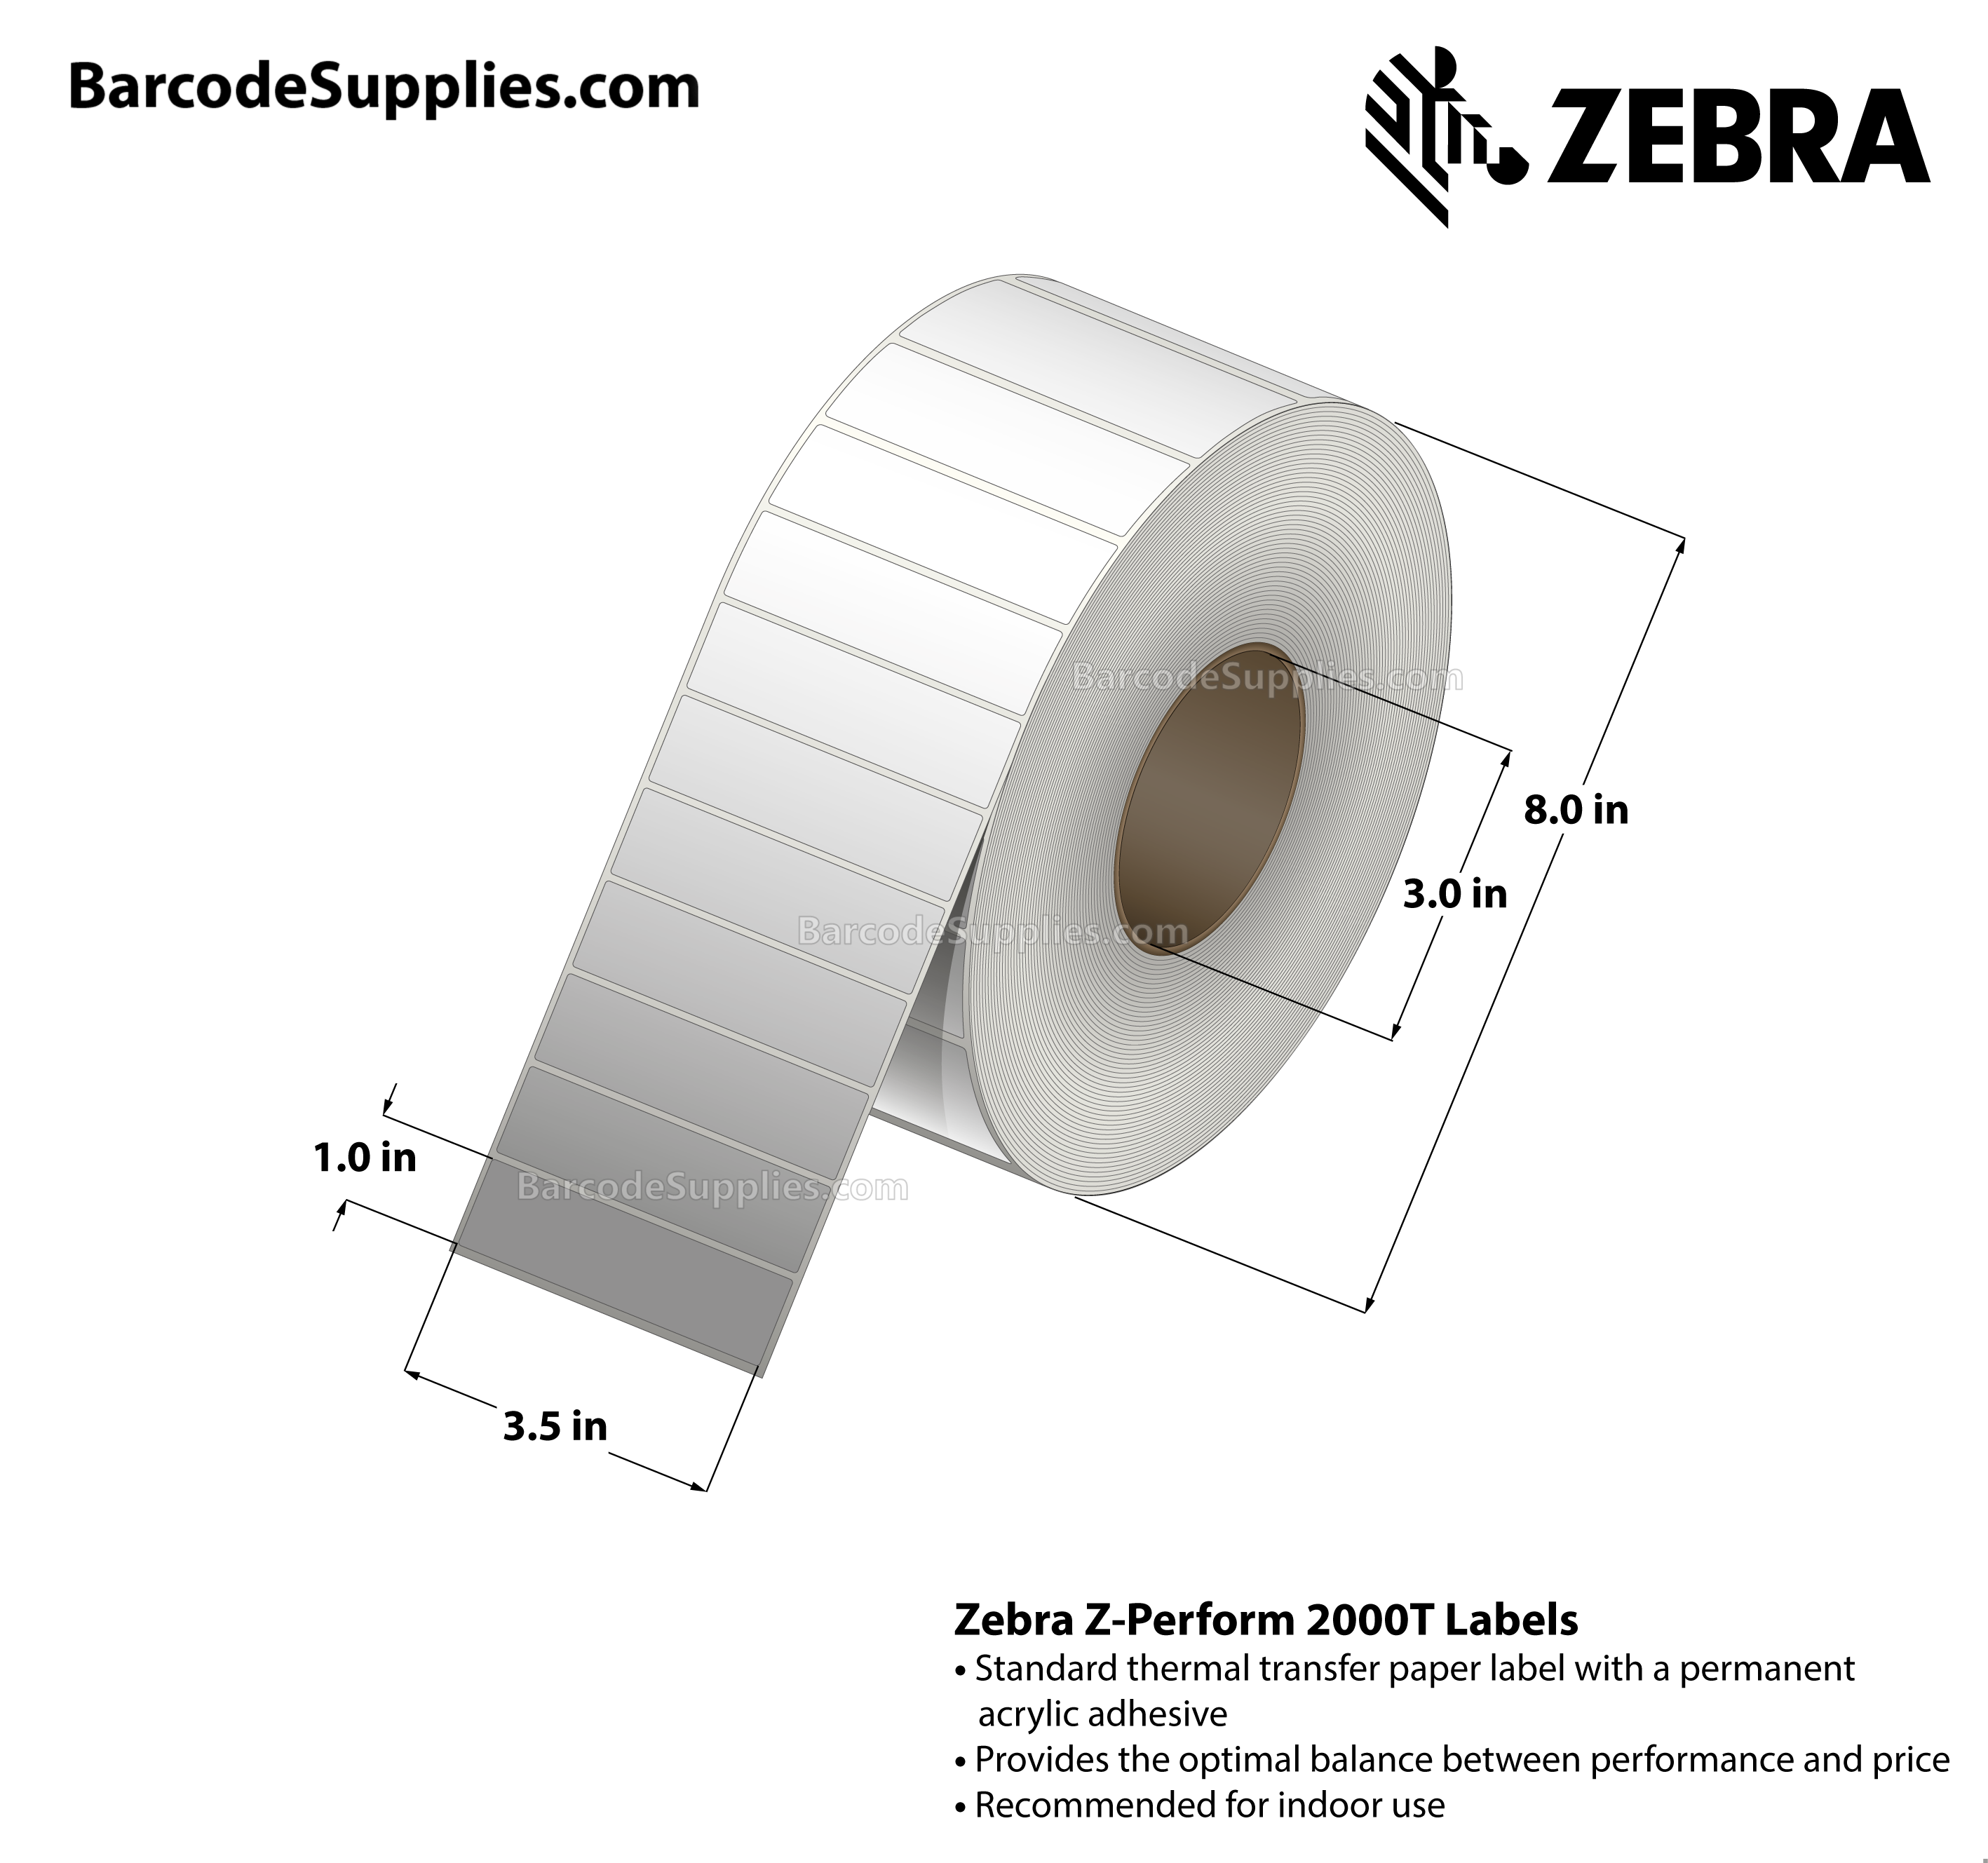 3.5 x 1 Thermal Transfer White Z-Perform 2000T All-Temp Labels With All-Temp Adhesive - Not Perforated - 5180 Labels Per Roll - Carton Of 6 Rolls - 31080 Labels Total - MPN: 72373